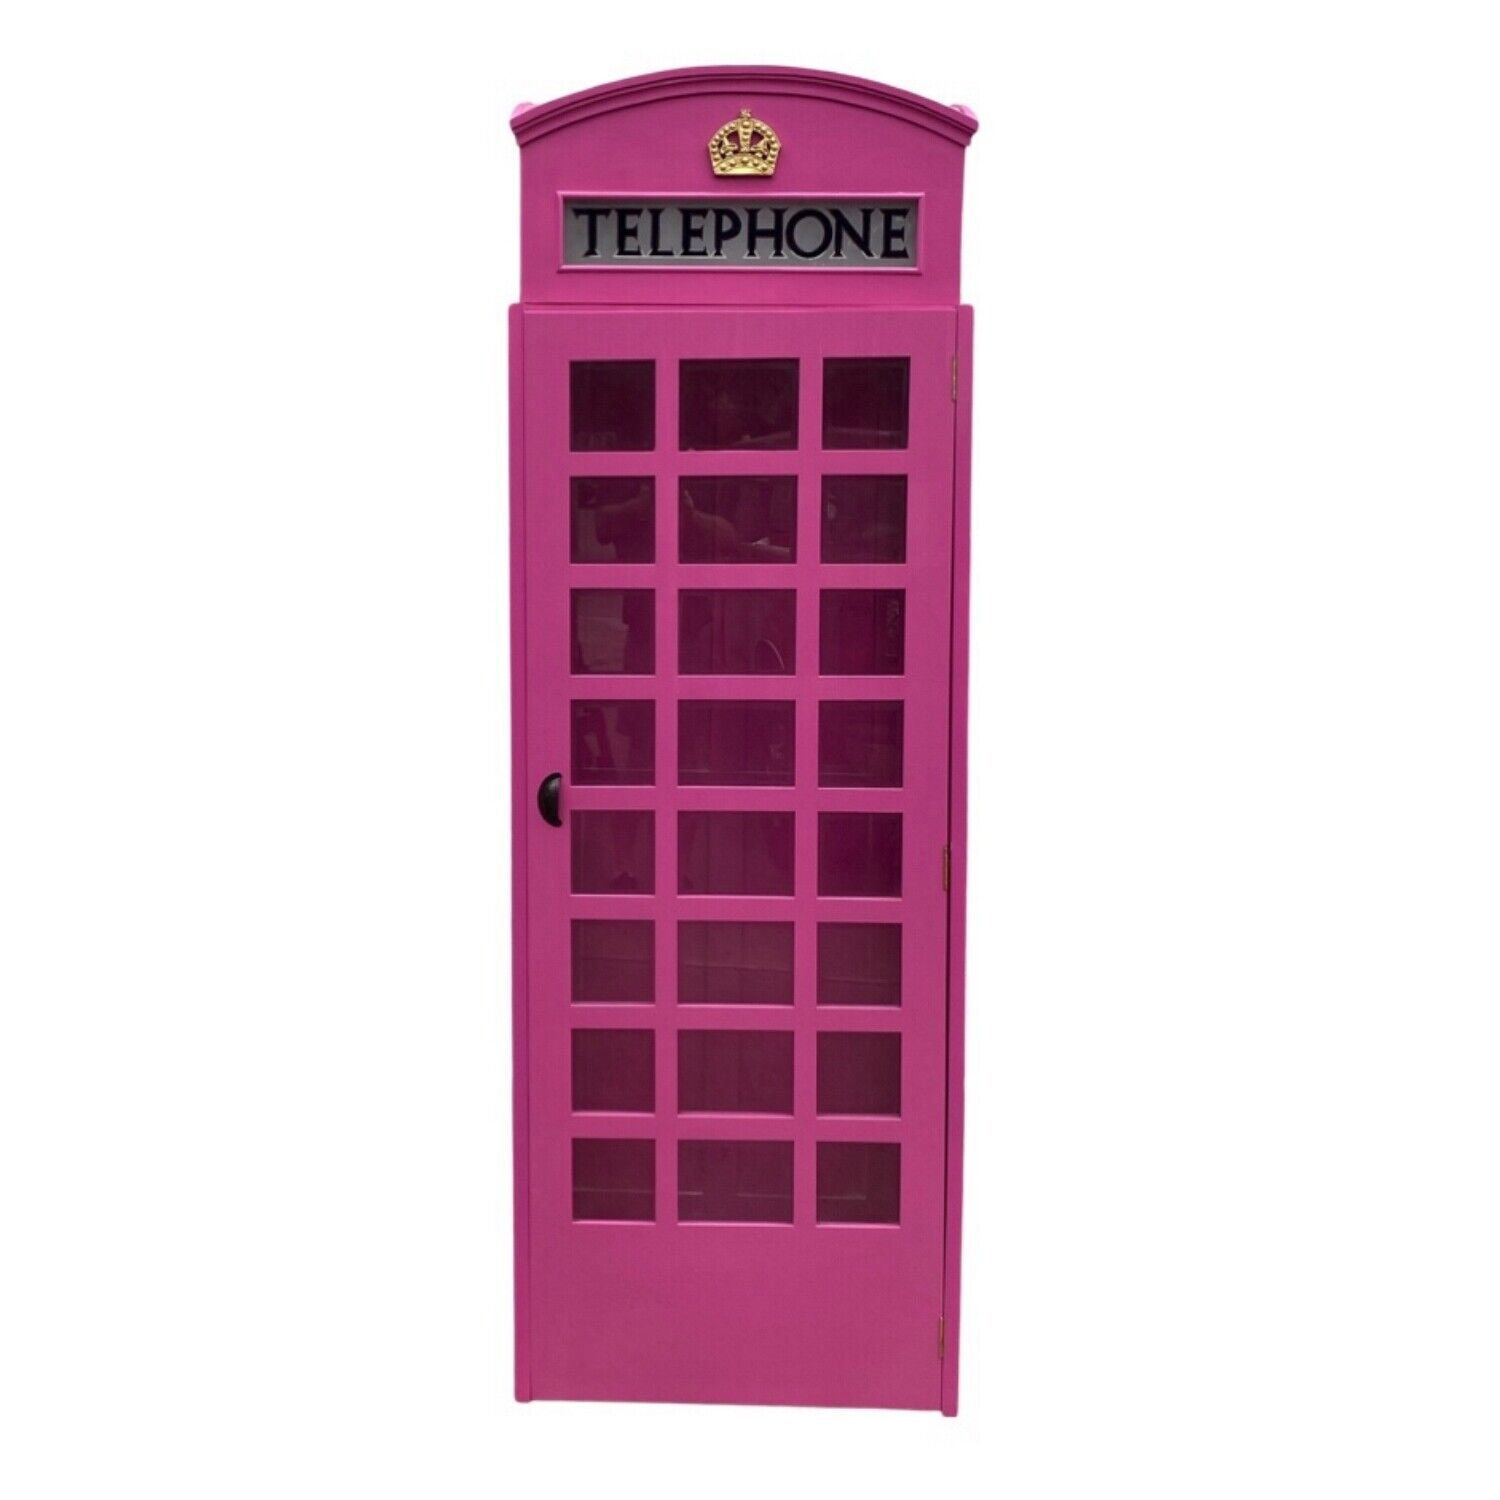 Red Hot Pink British Wood Telephone Phone Booth English Like Cast Iron